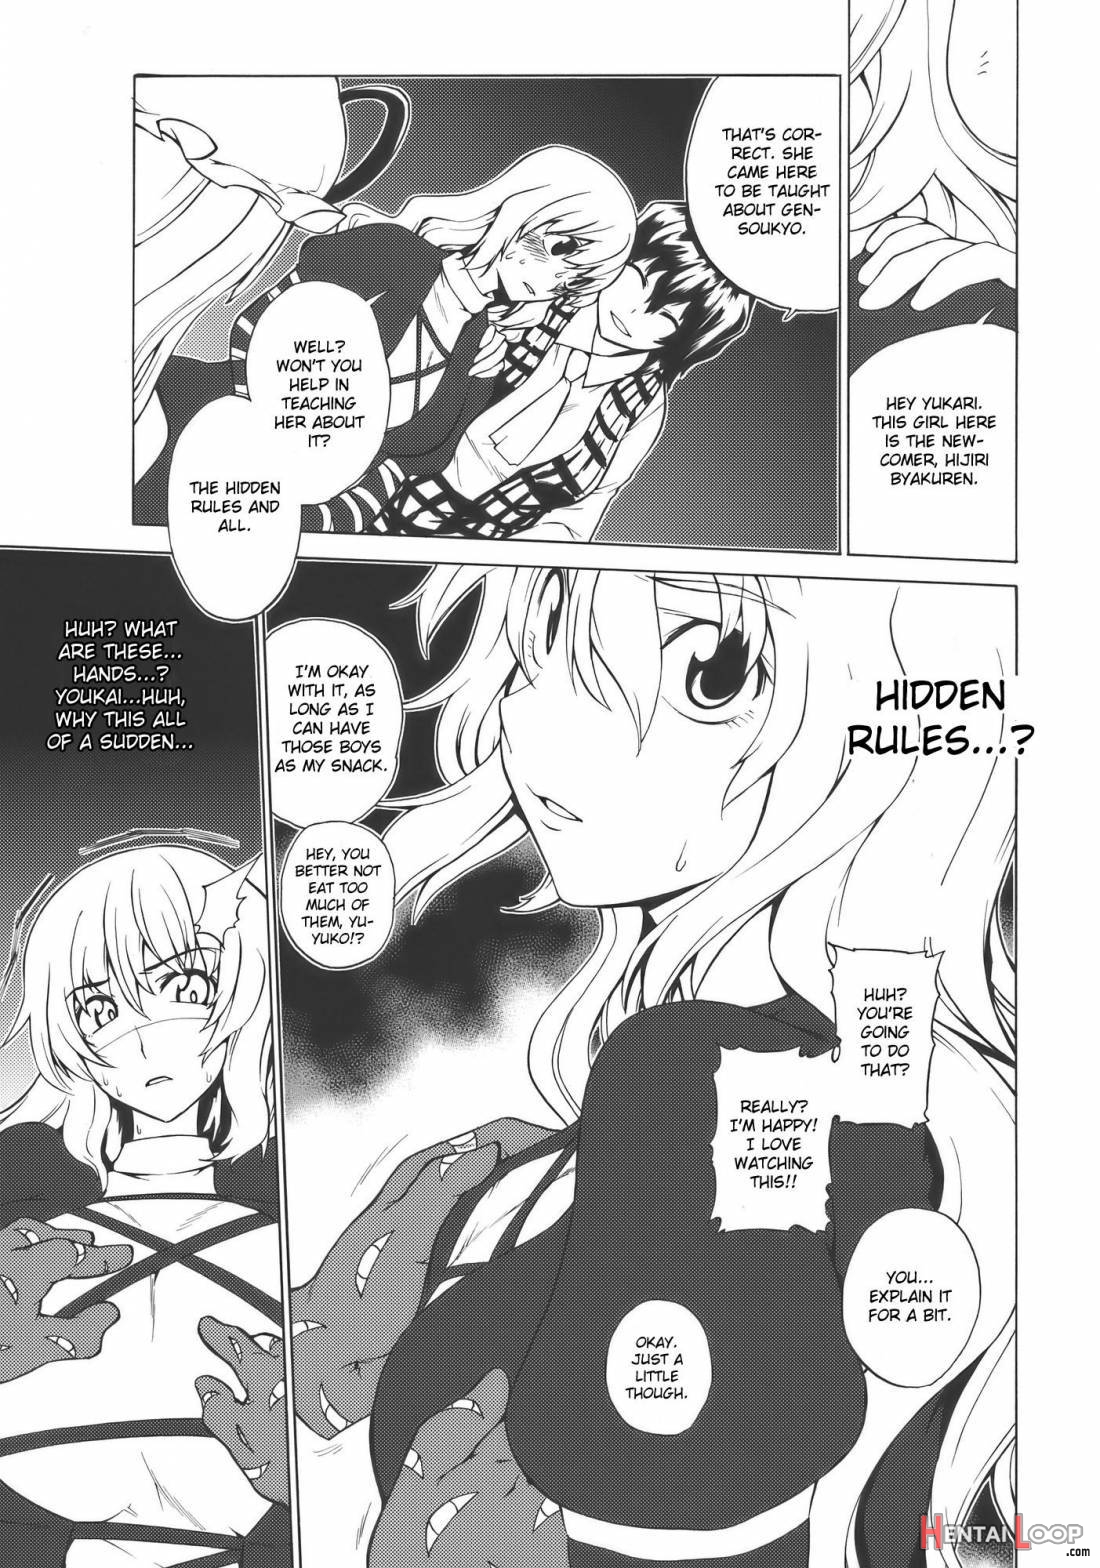 Playing Gensoukyou Now page 6